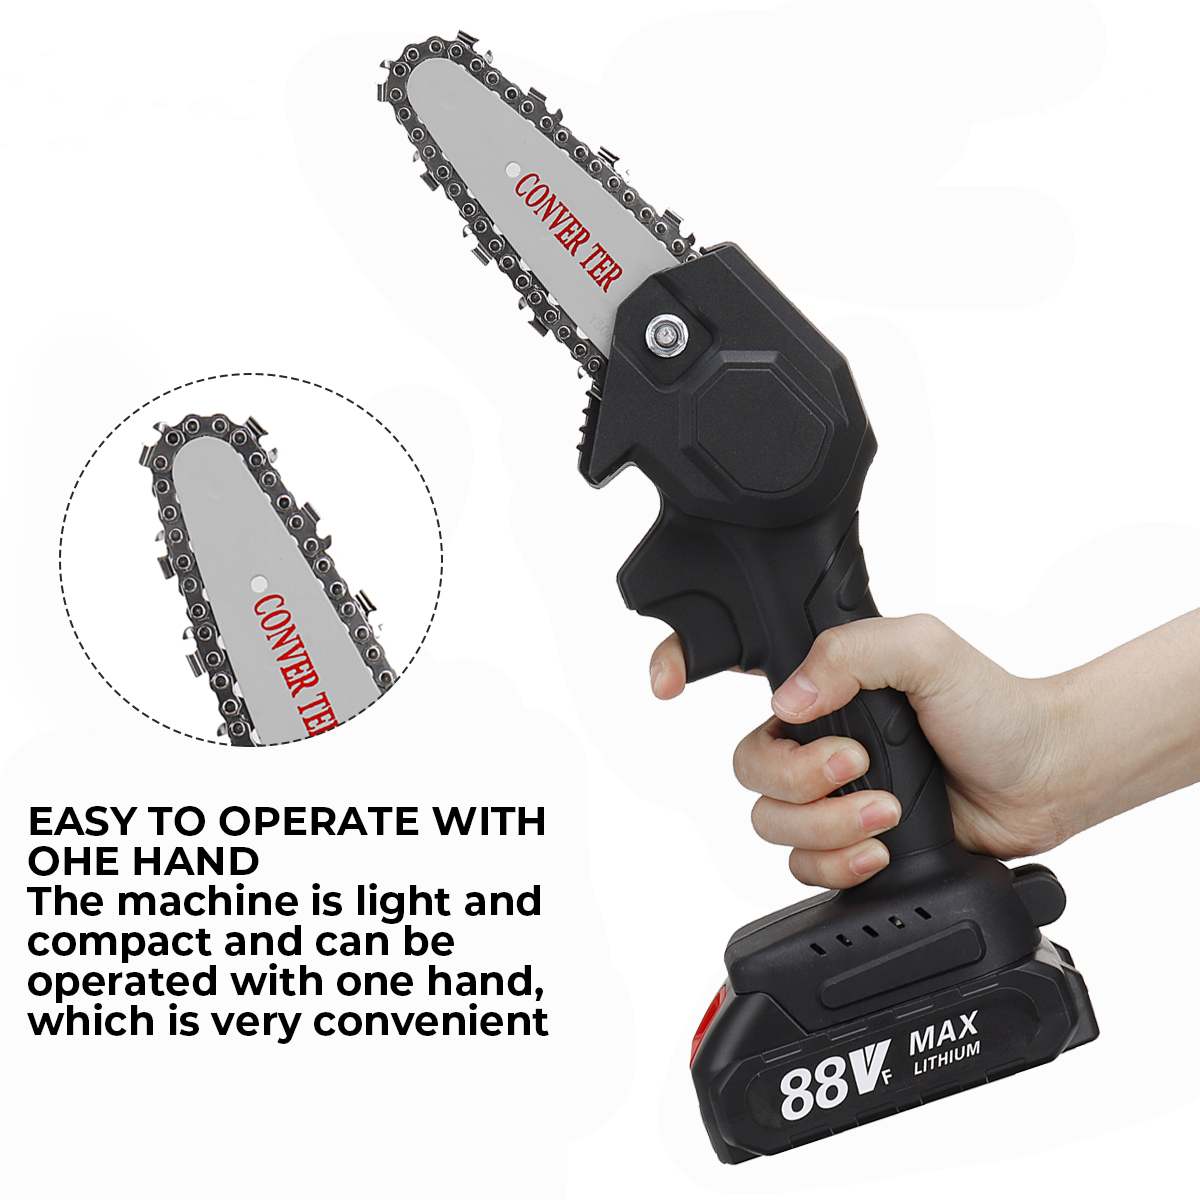 4-Inch-7500mAh-Mini-Electric-Chain-Saw-Pruning-Chainsaw-Cordless-Garden-Tree-Logging-Trimming-Saw-Fo-1798984-4